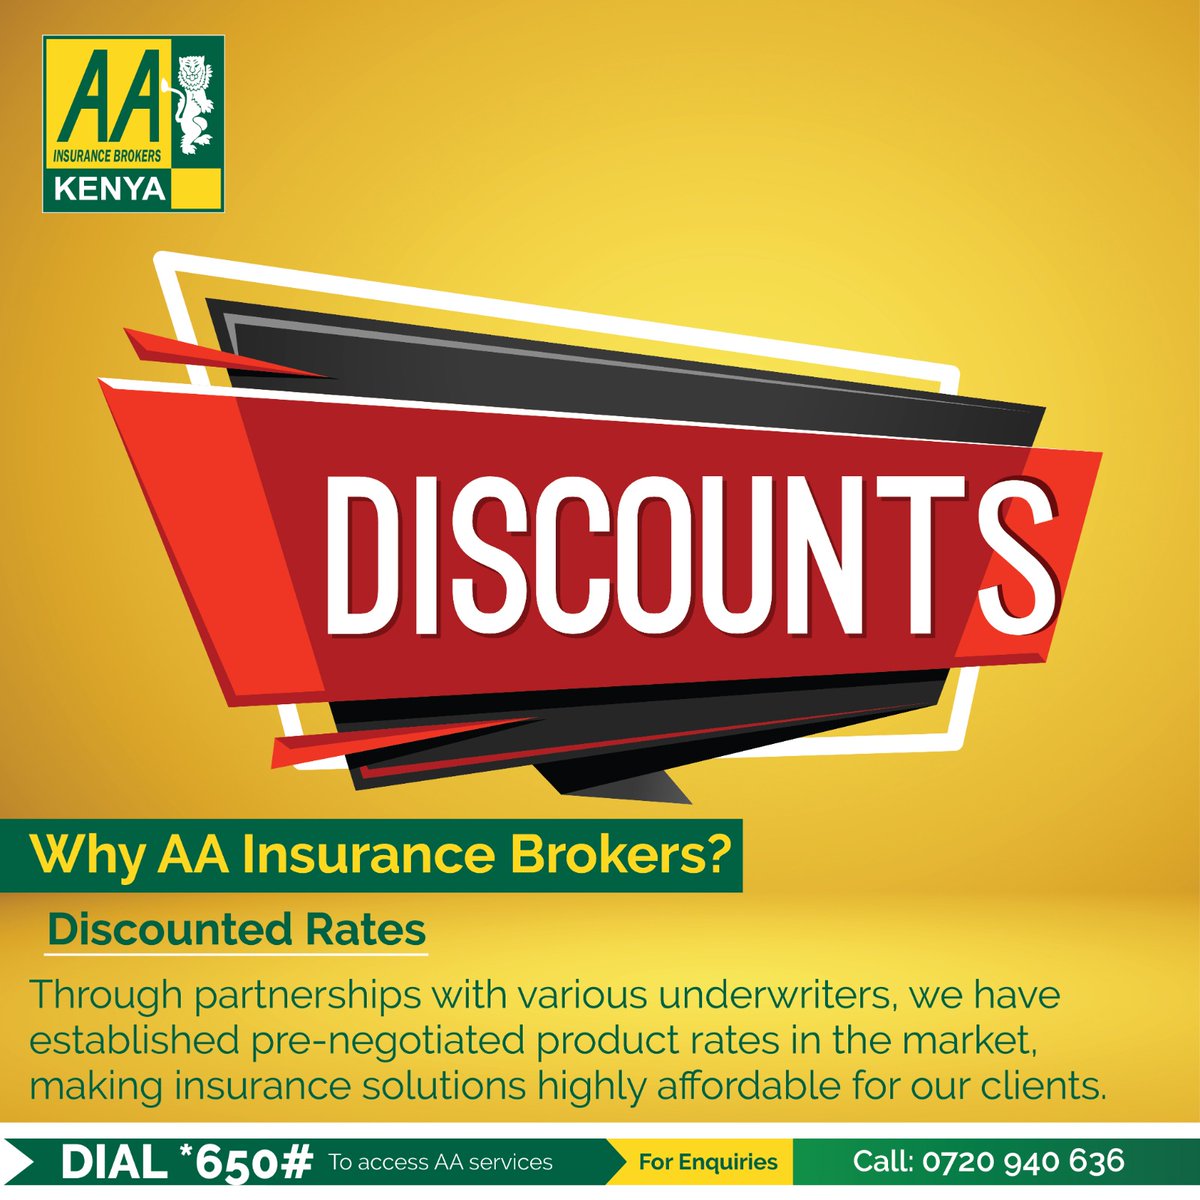 Through partnerships with underwriters, AA Insurance Brokers has secured discounted rates, making sure our clients get the best value. Your financial peace of mind is our priority. Insure with us, call us on 0720940636
#AAIBCares